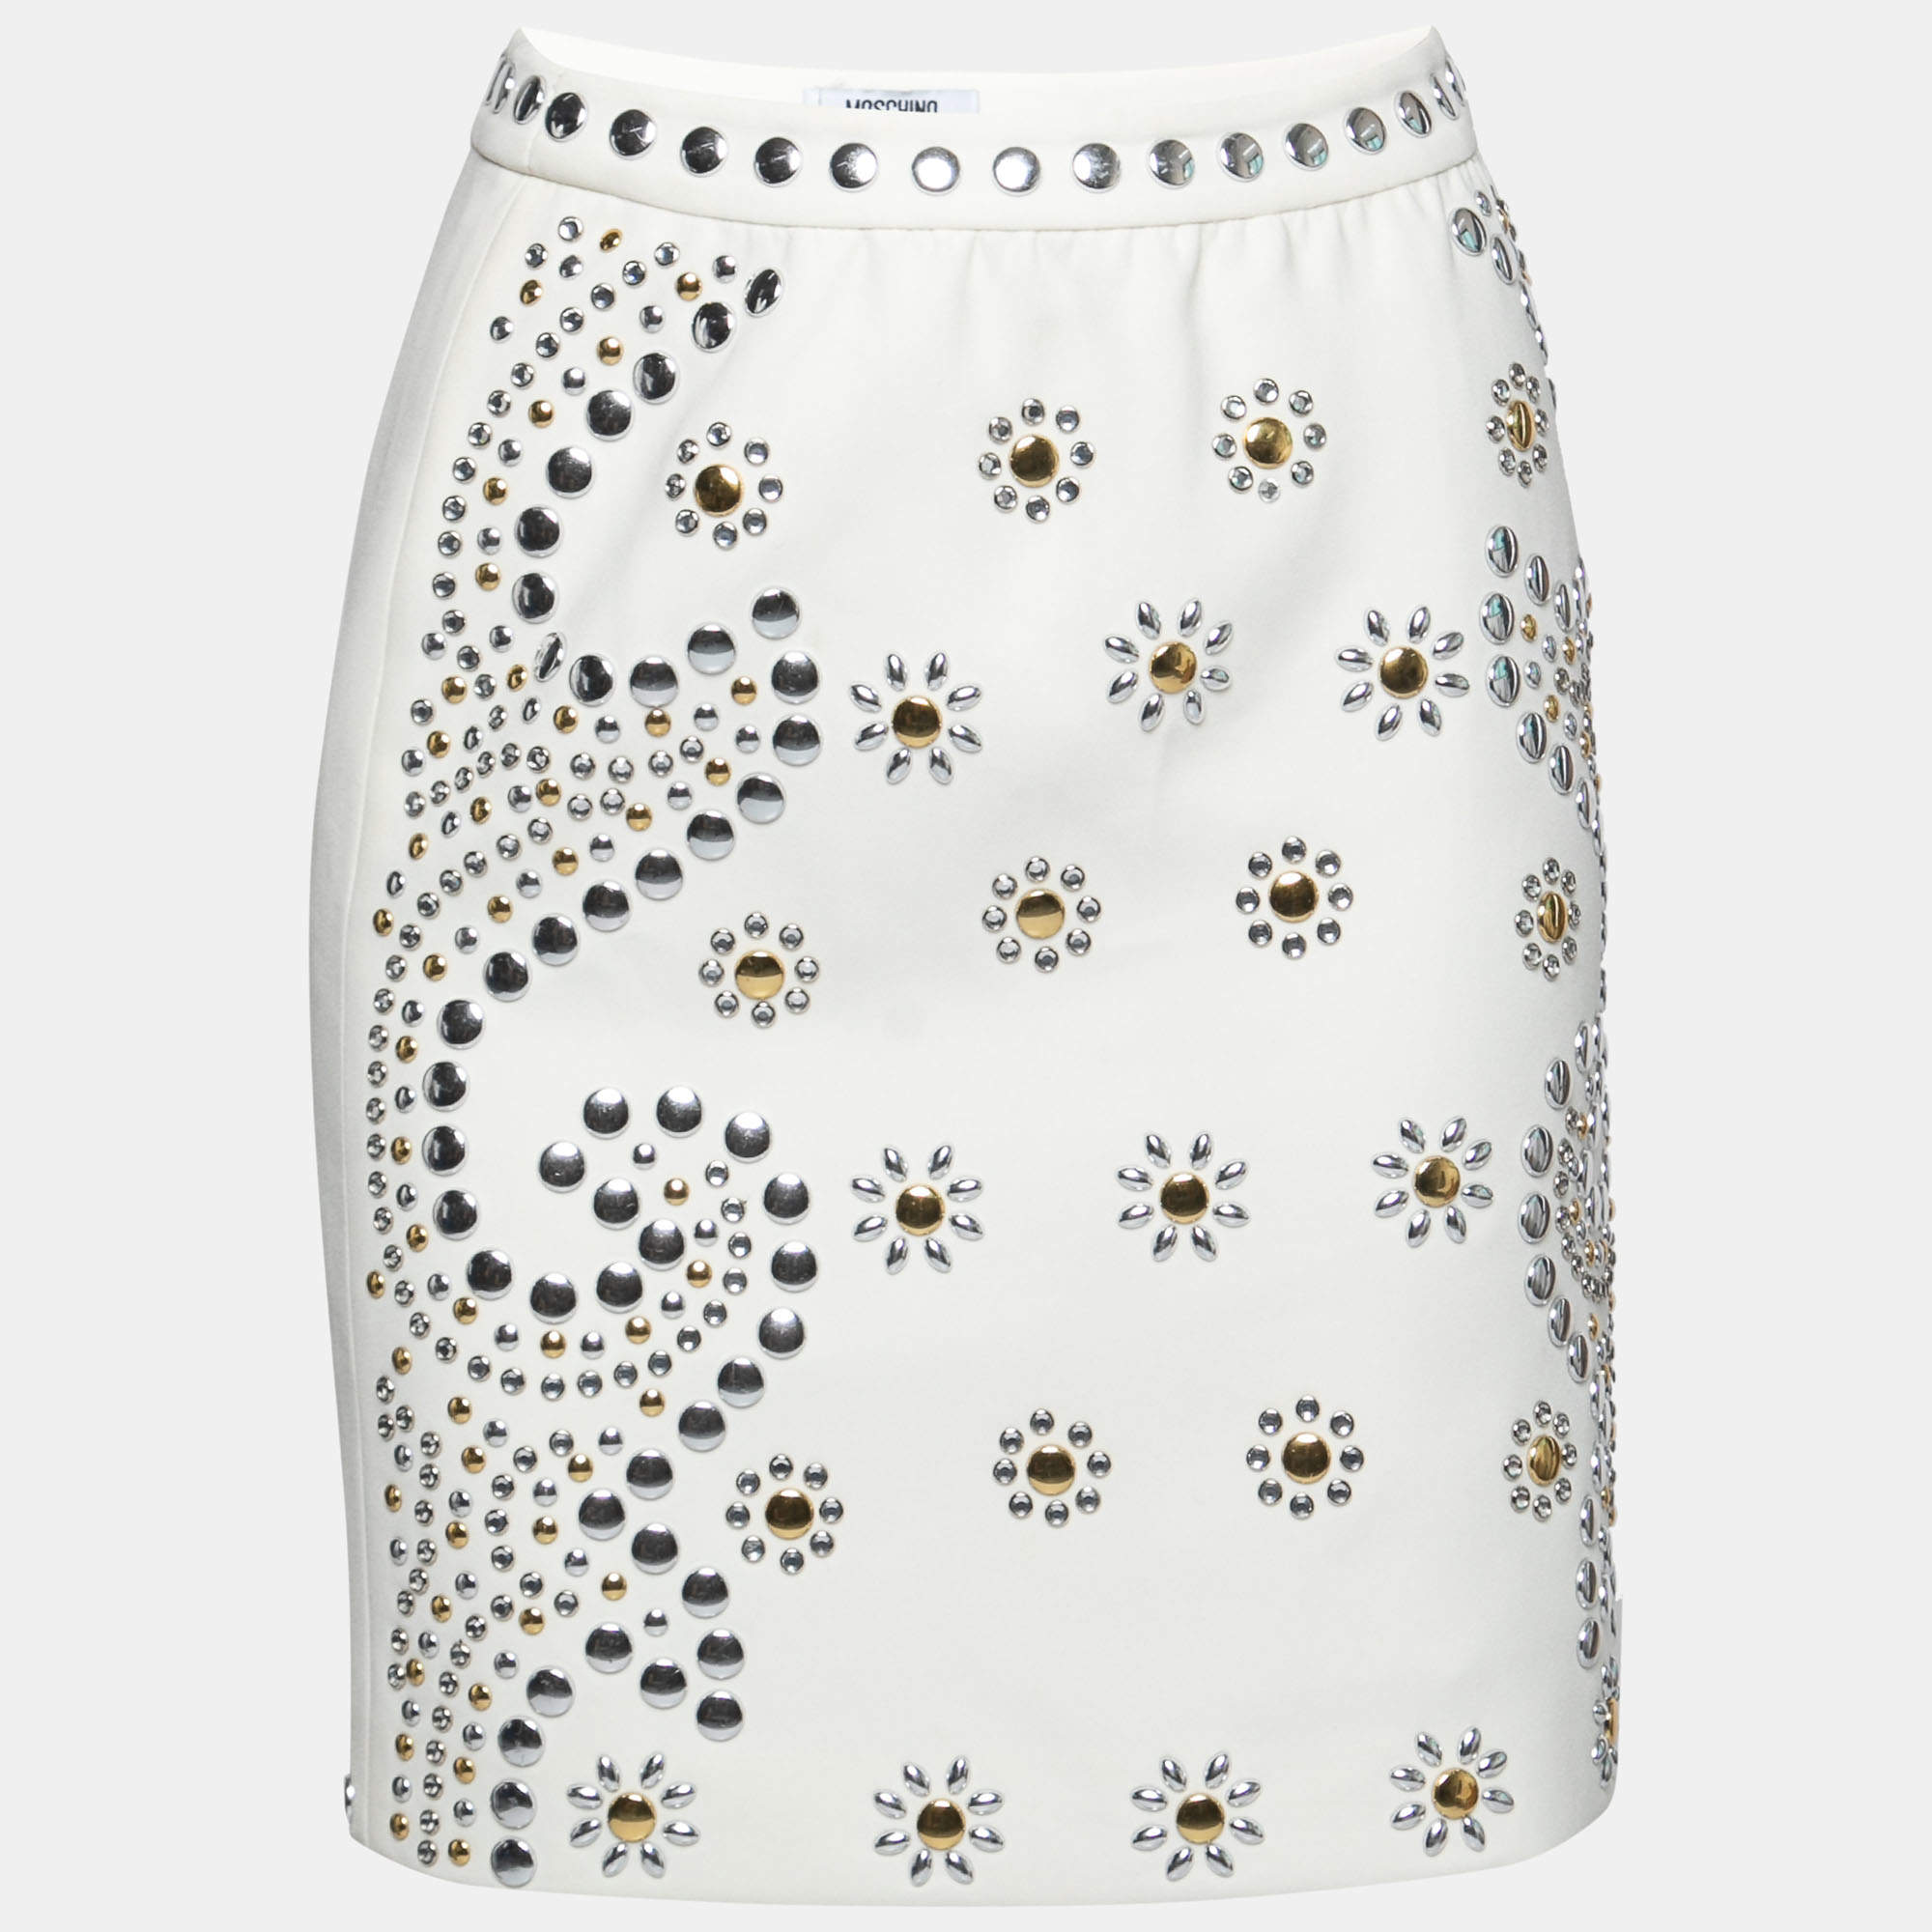 Moschino Cheap and Chic Cream Crepe Beaded Floral Pattern Skirt S 